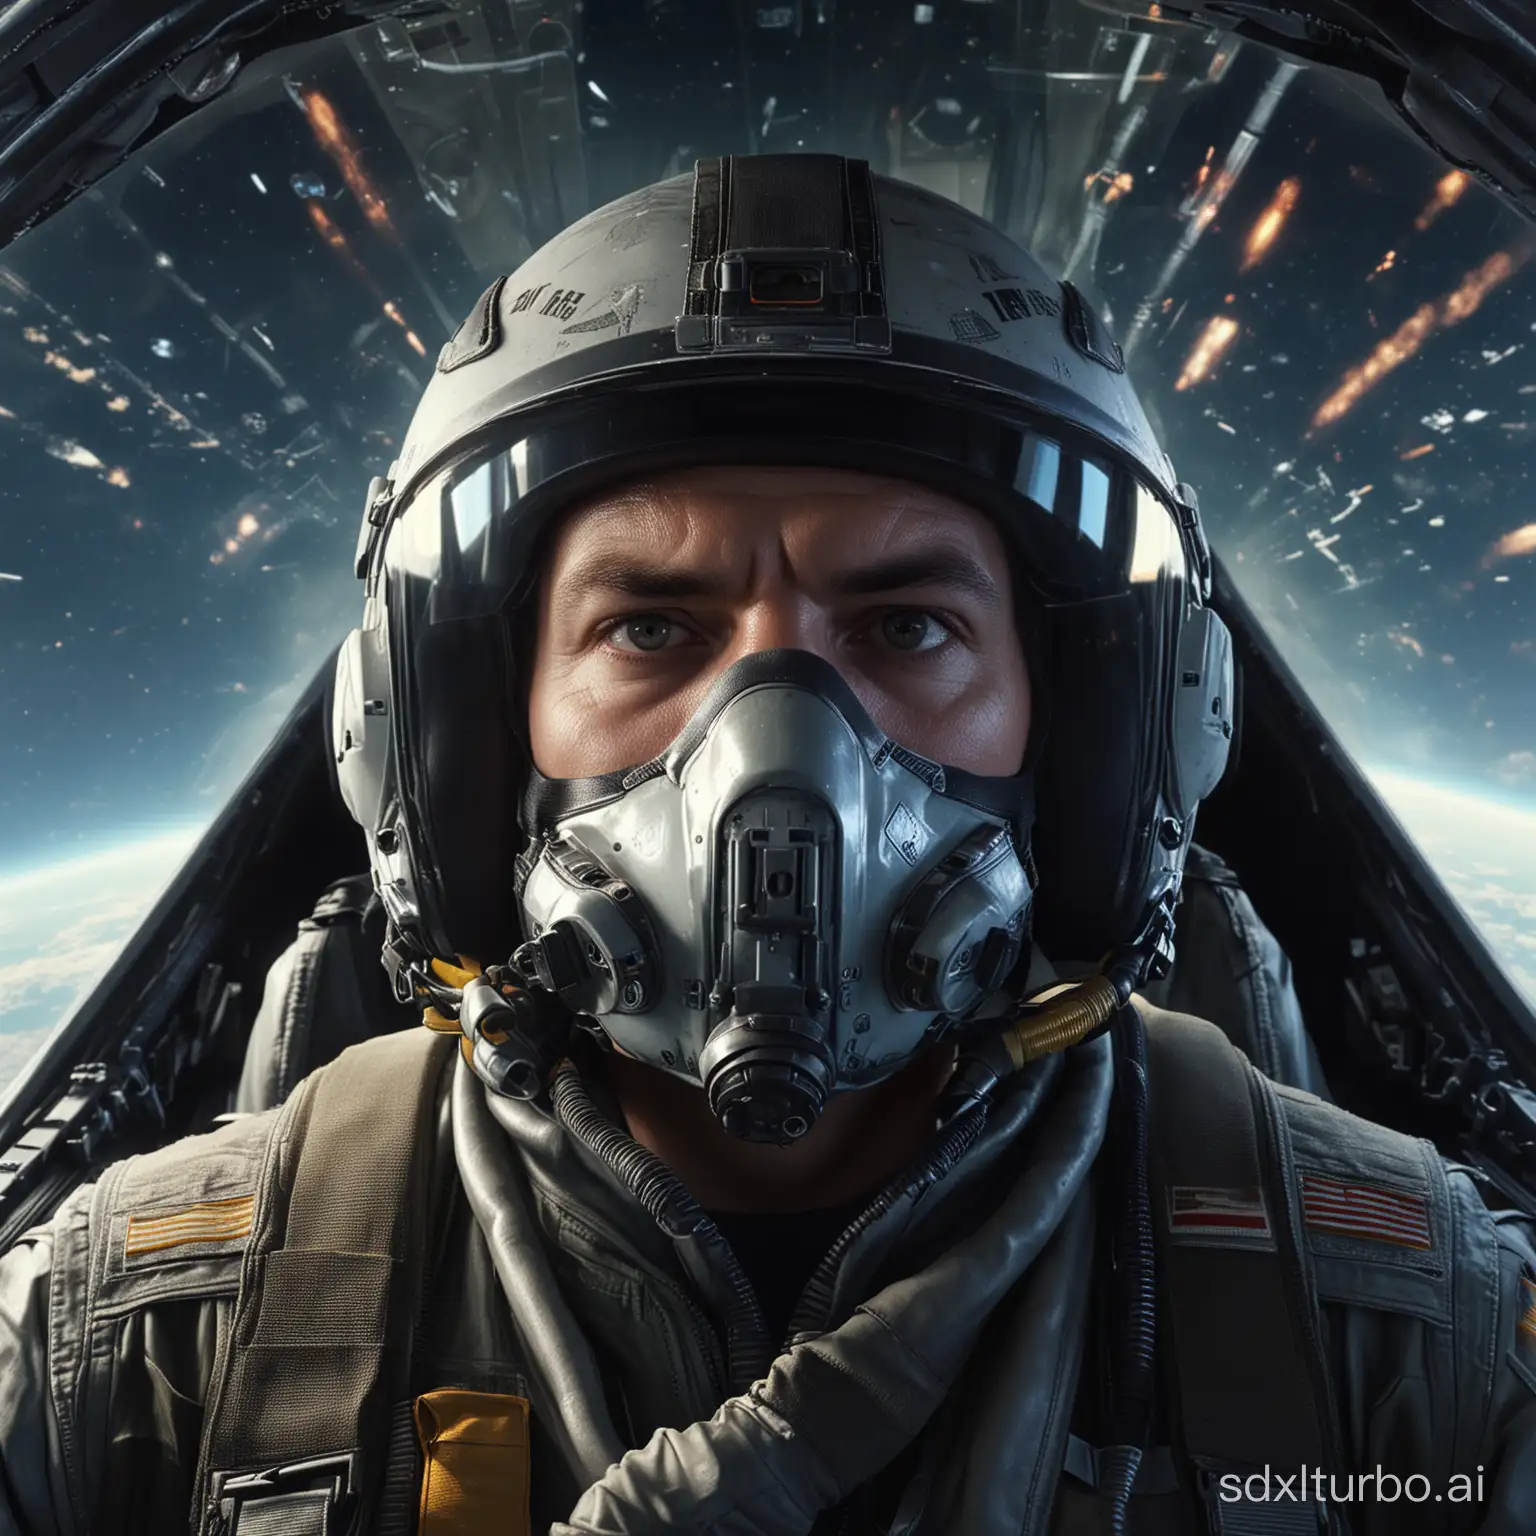 portrait of a space fighter inside his fighter jet, the pilot is wearing his oxygen mask and his helmet visor at front of his eyes, there is a reflection on the visor for the HUD plus some information about speed, altitude and tracking information about enemy fighter. show in the scene the sense of an intense arial battel.